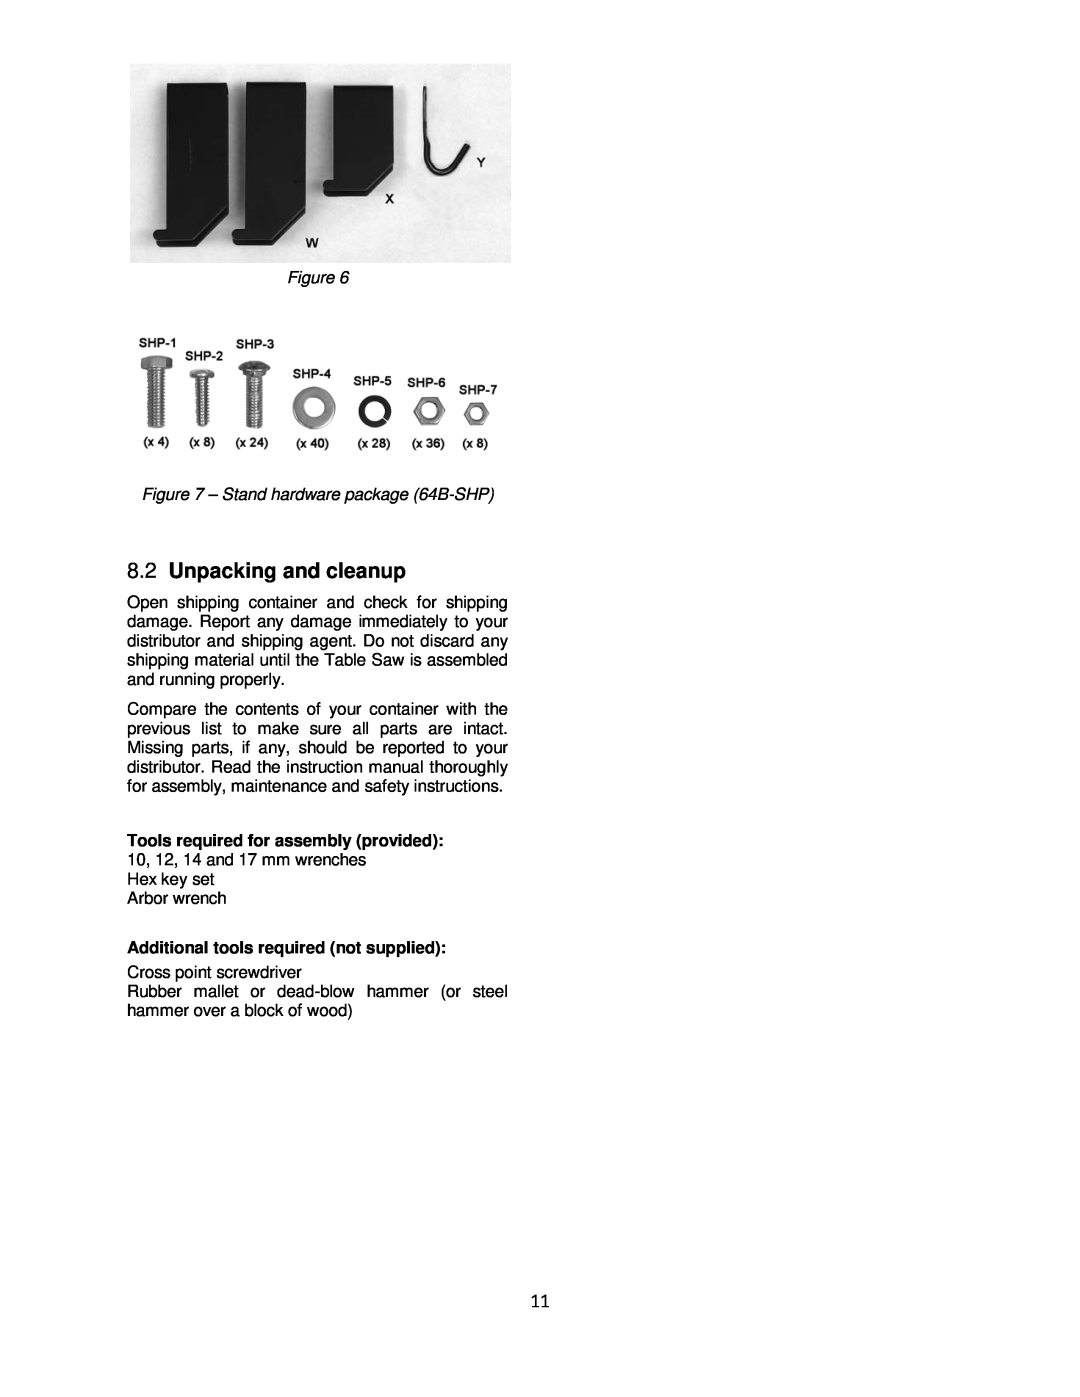 Powermatic 64B operating instructions Unpacking and cleanup, Additional tools required not supplied 